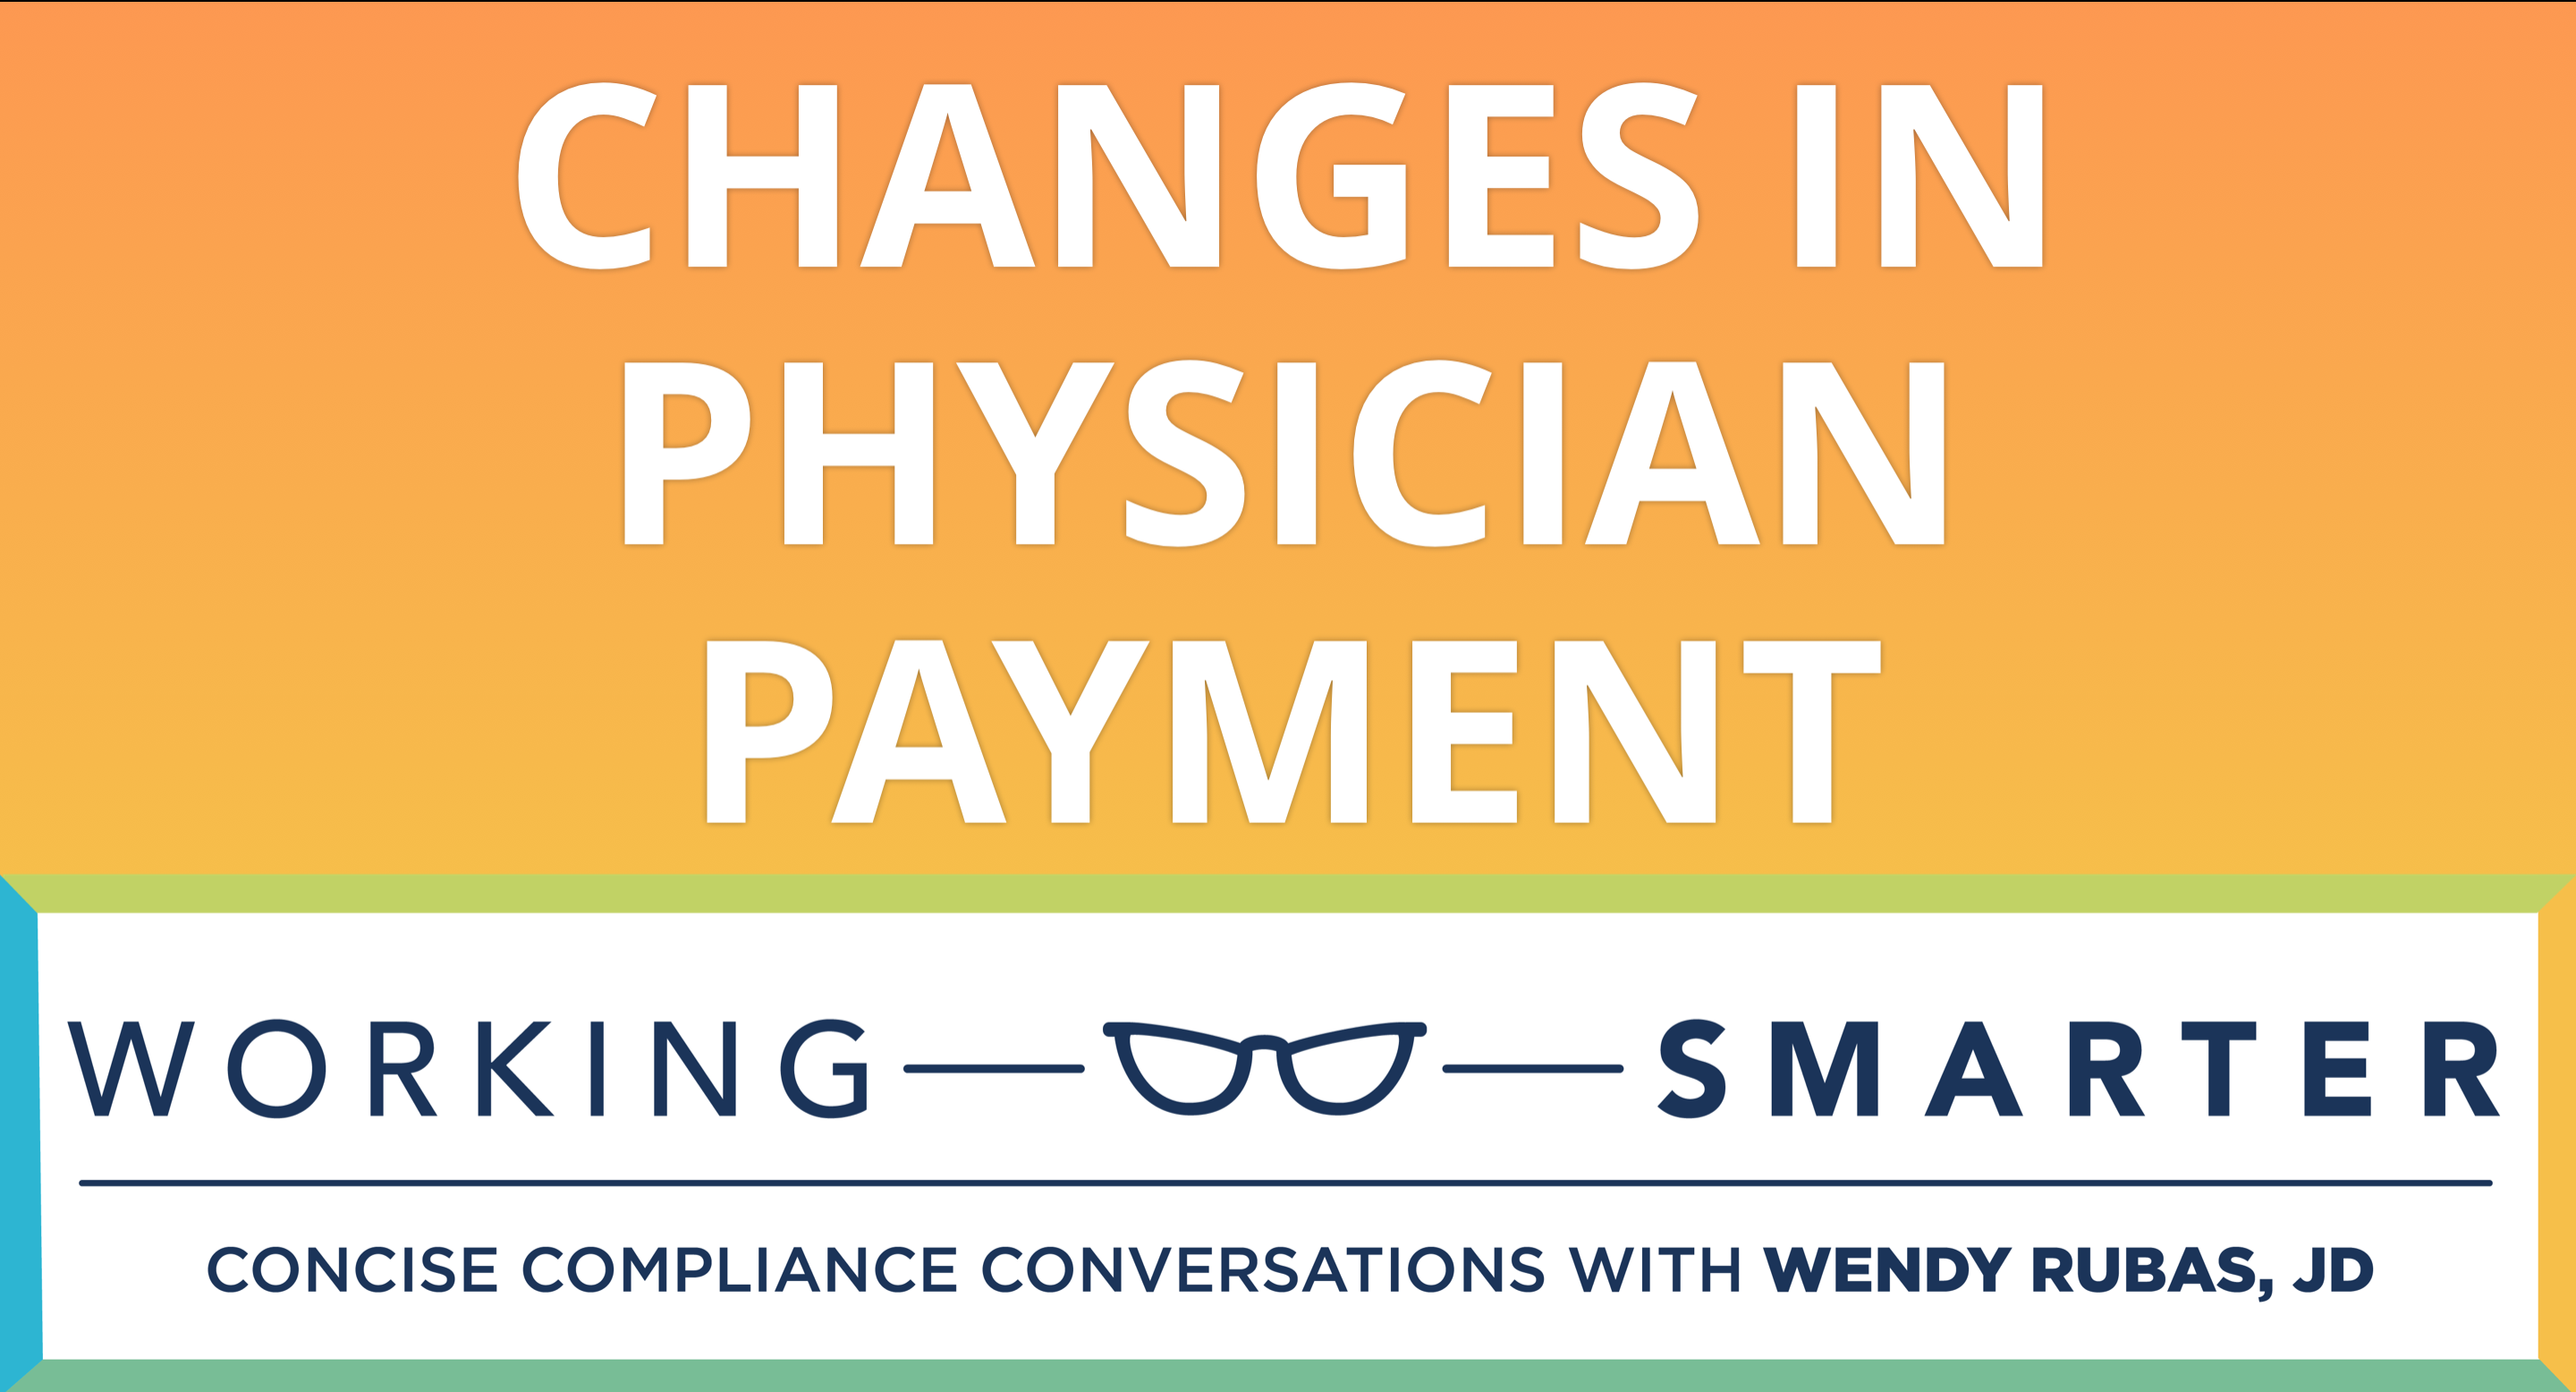 Working Smarter: Changes in Physician Payment